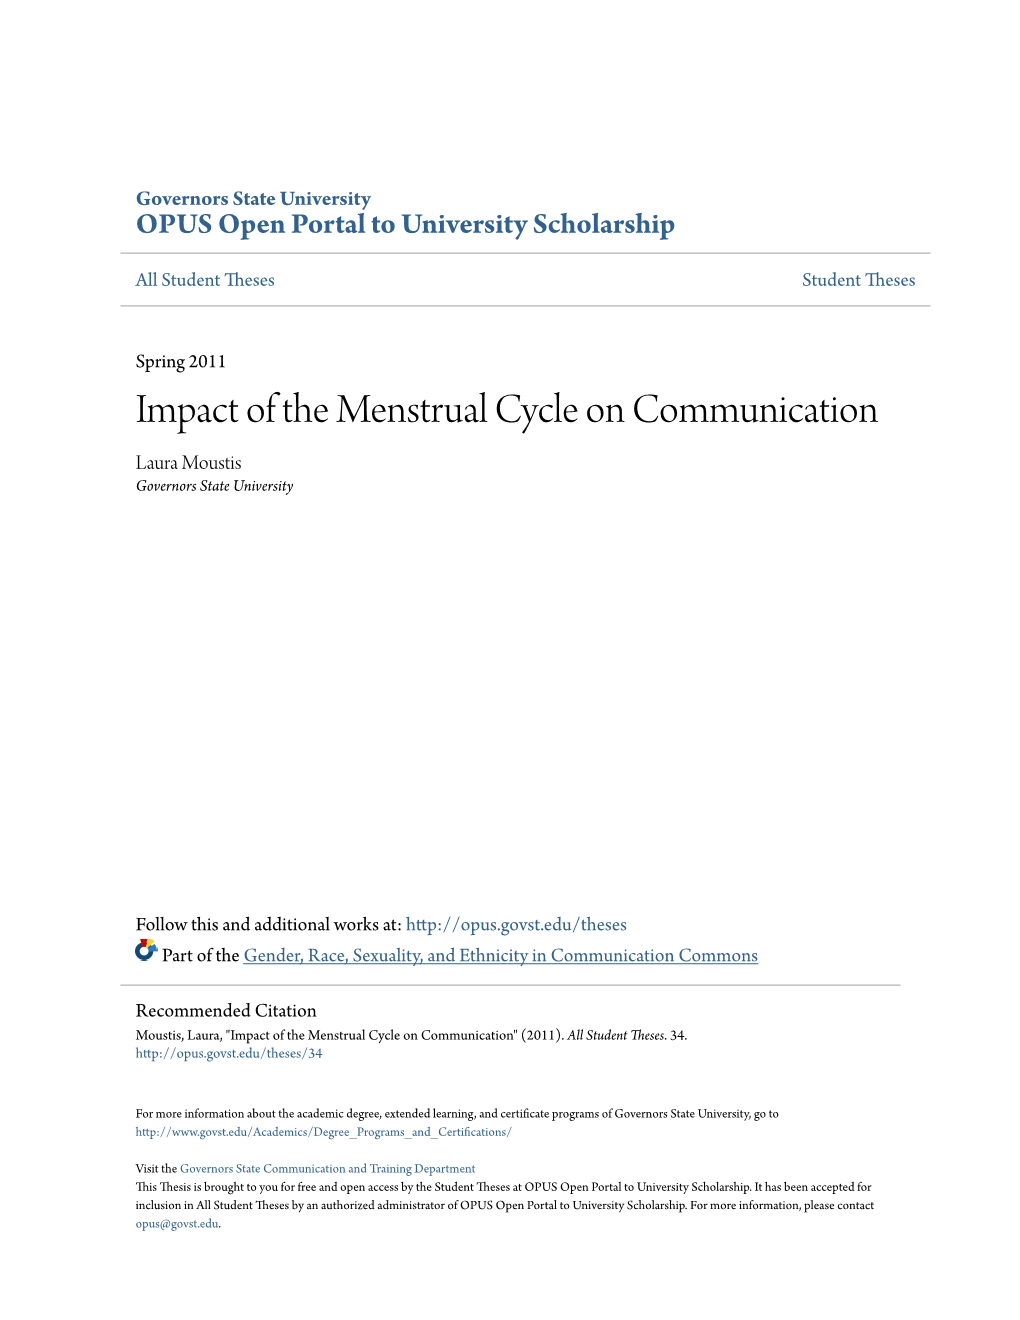 Impact of the Menstrual Cycle on Communication Laura Moustis Governors State University